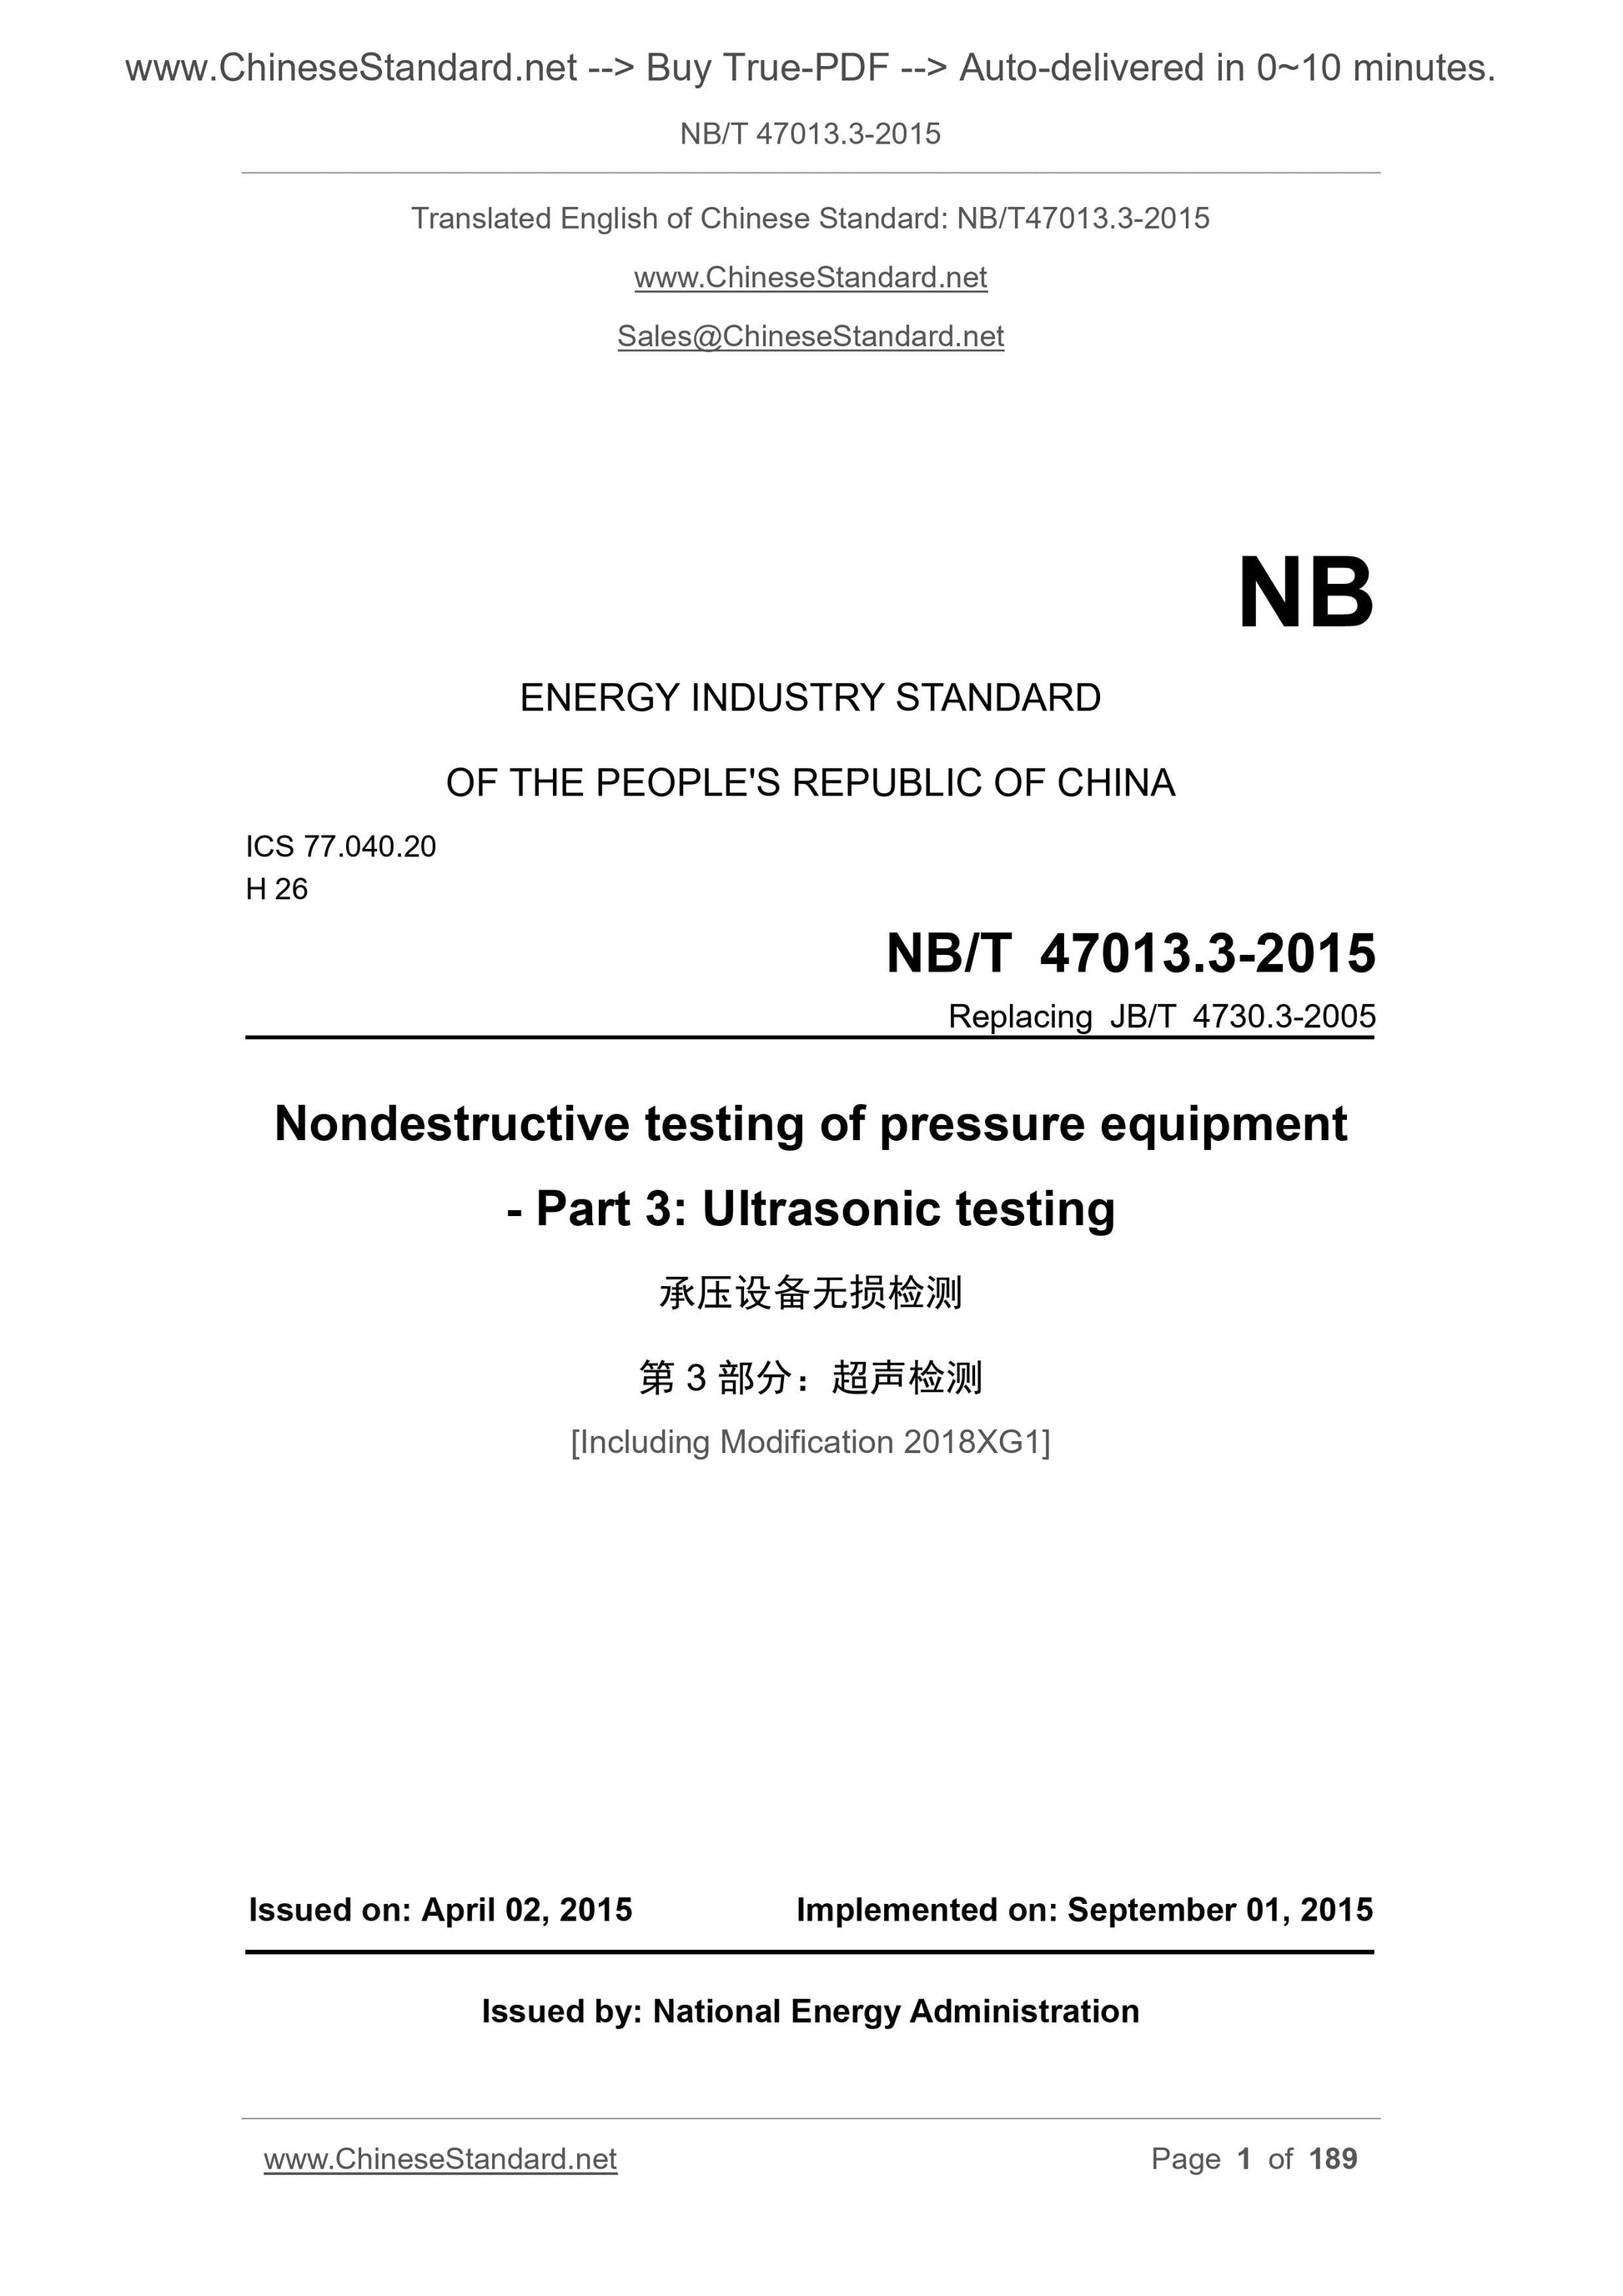 NB/T 47013.3-2015 Page 1